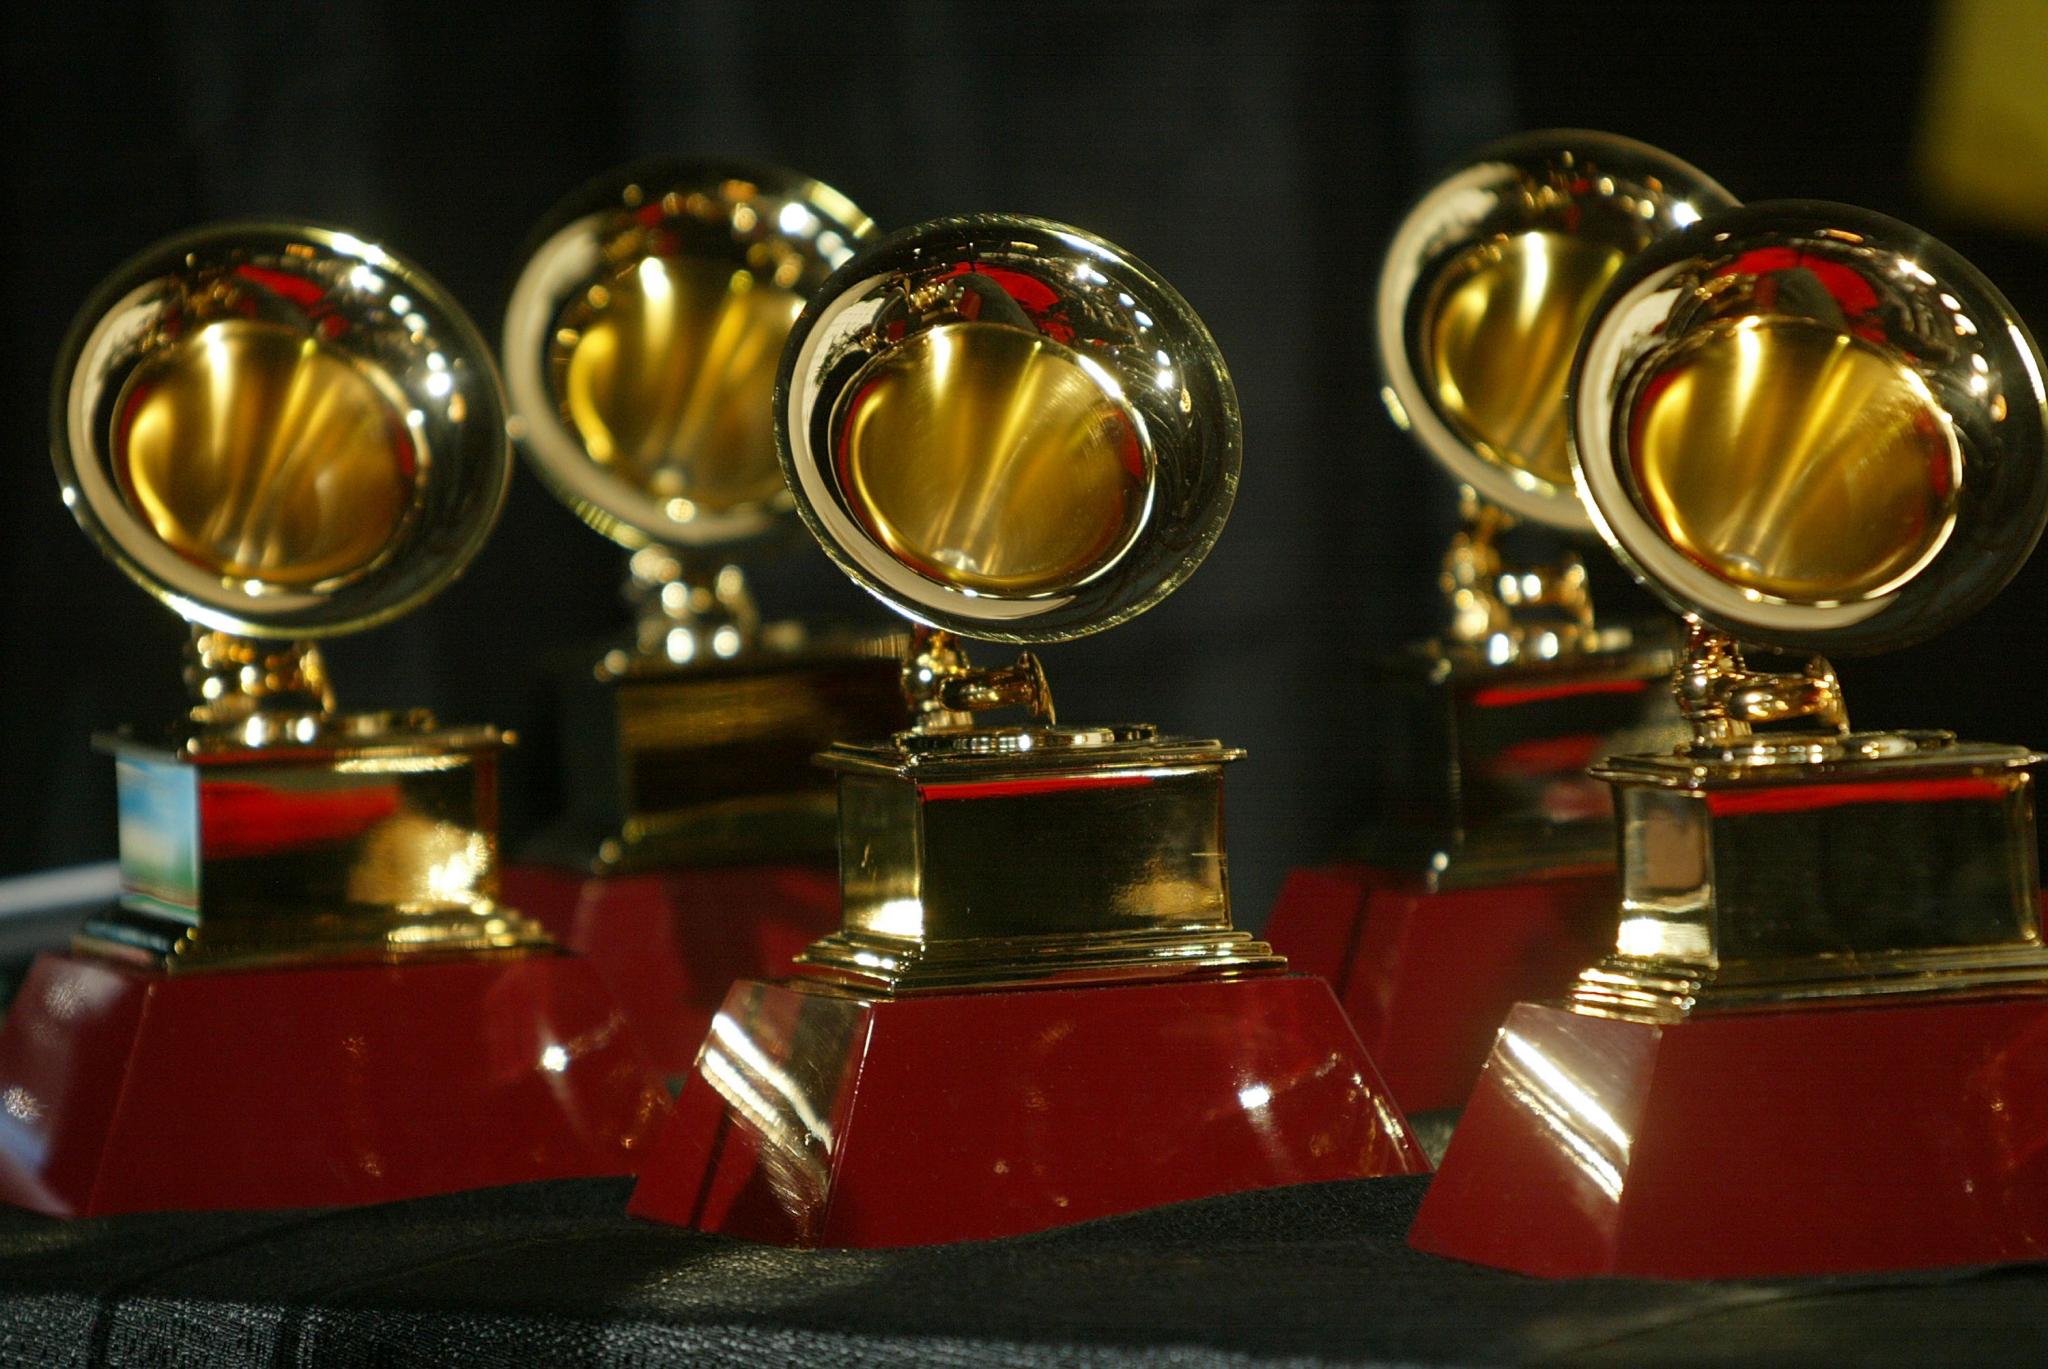 What's Your Top Moment in Grammys History?
